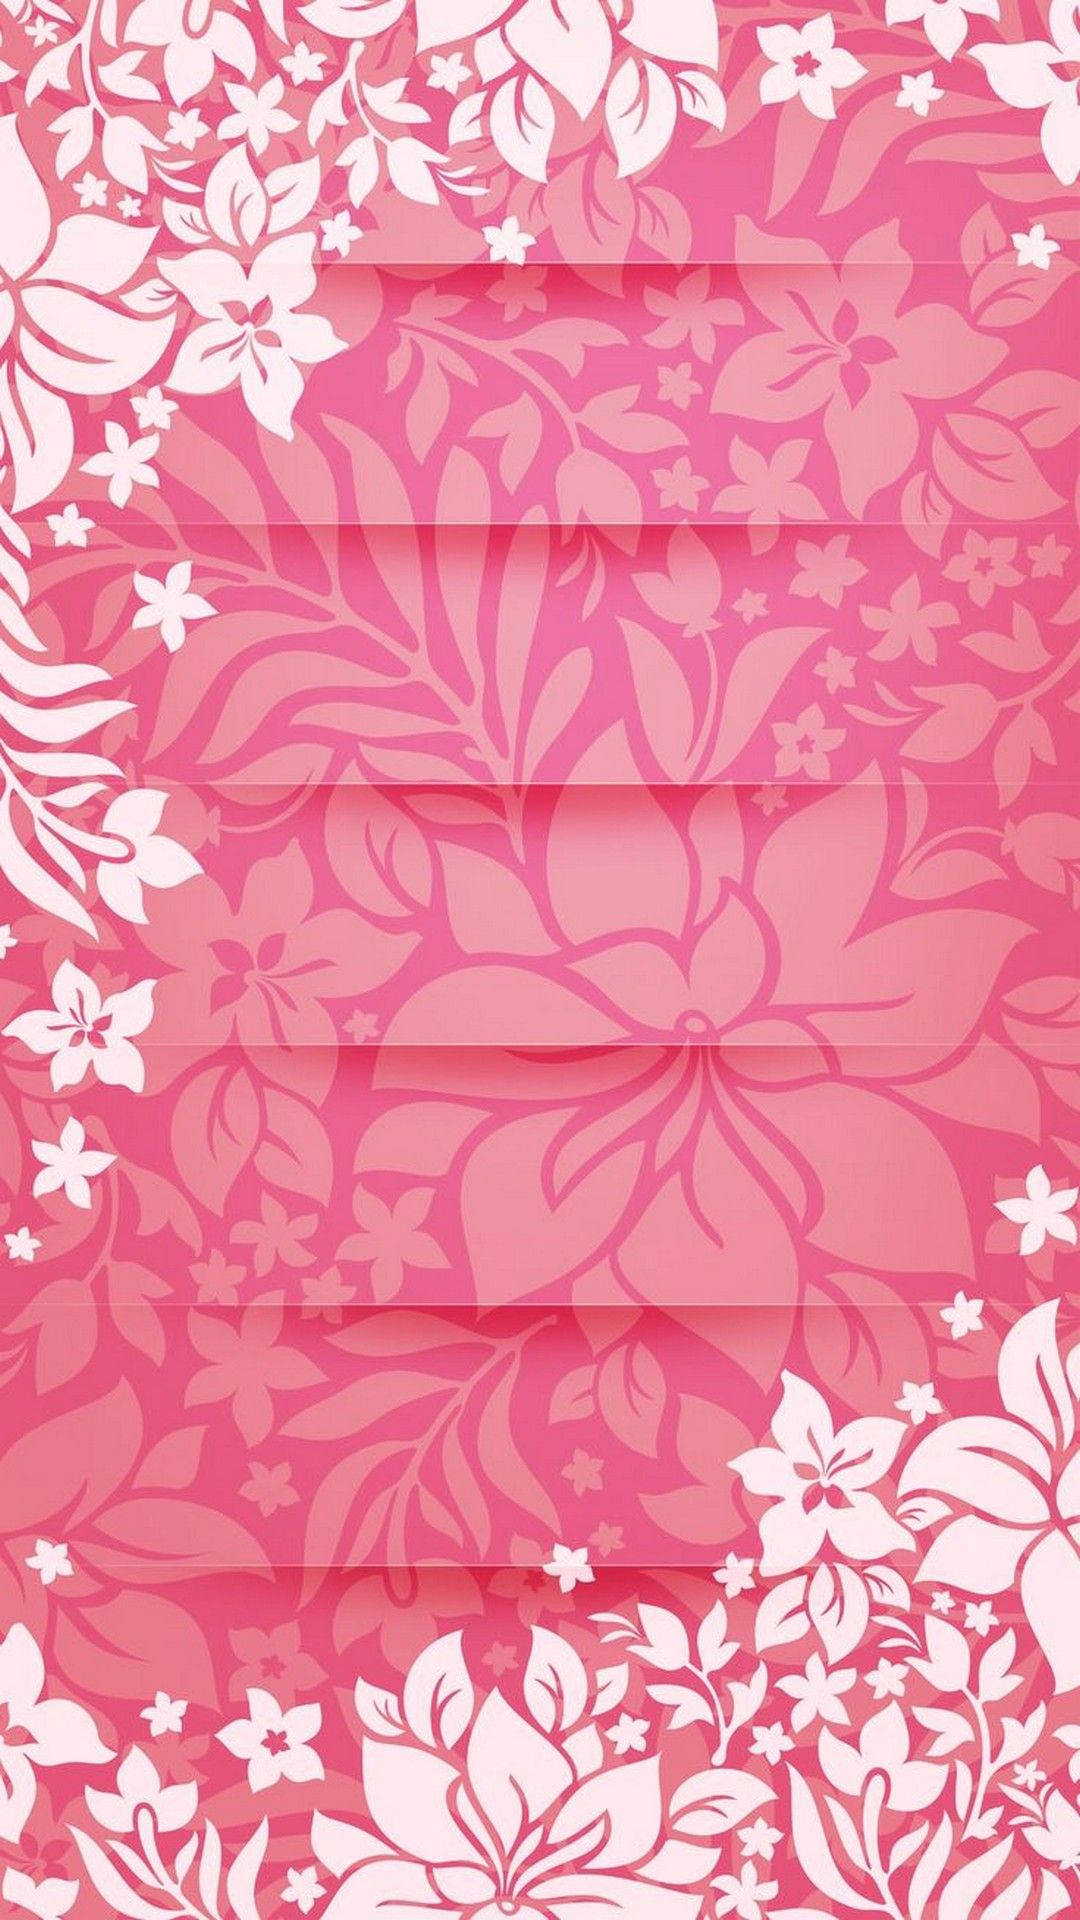 Create A One-of-a-kind Feminine Look With Our Girly White And Pink Abstract Floral Pattern! Background